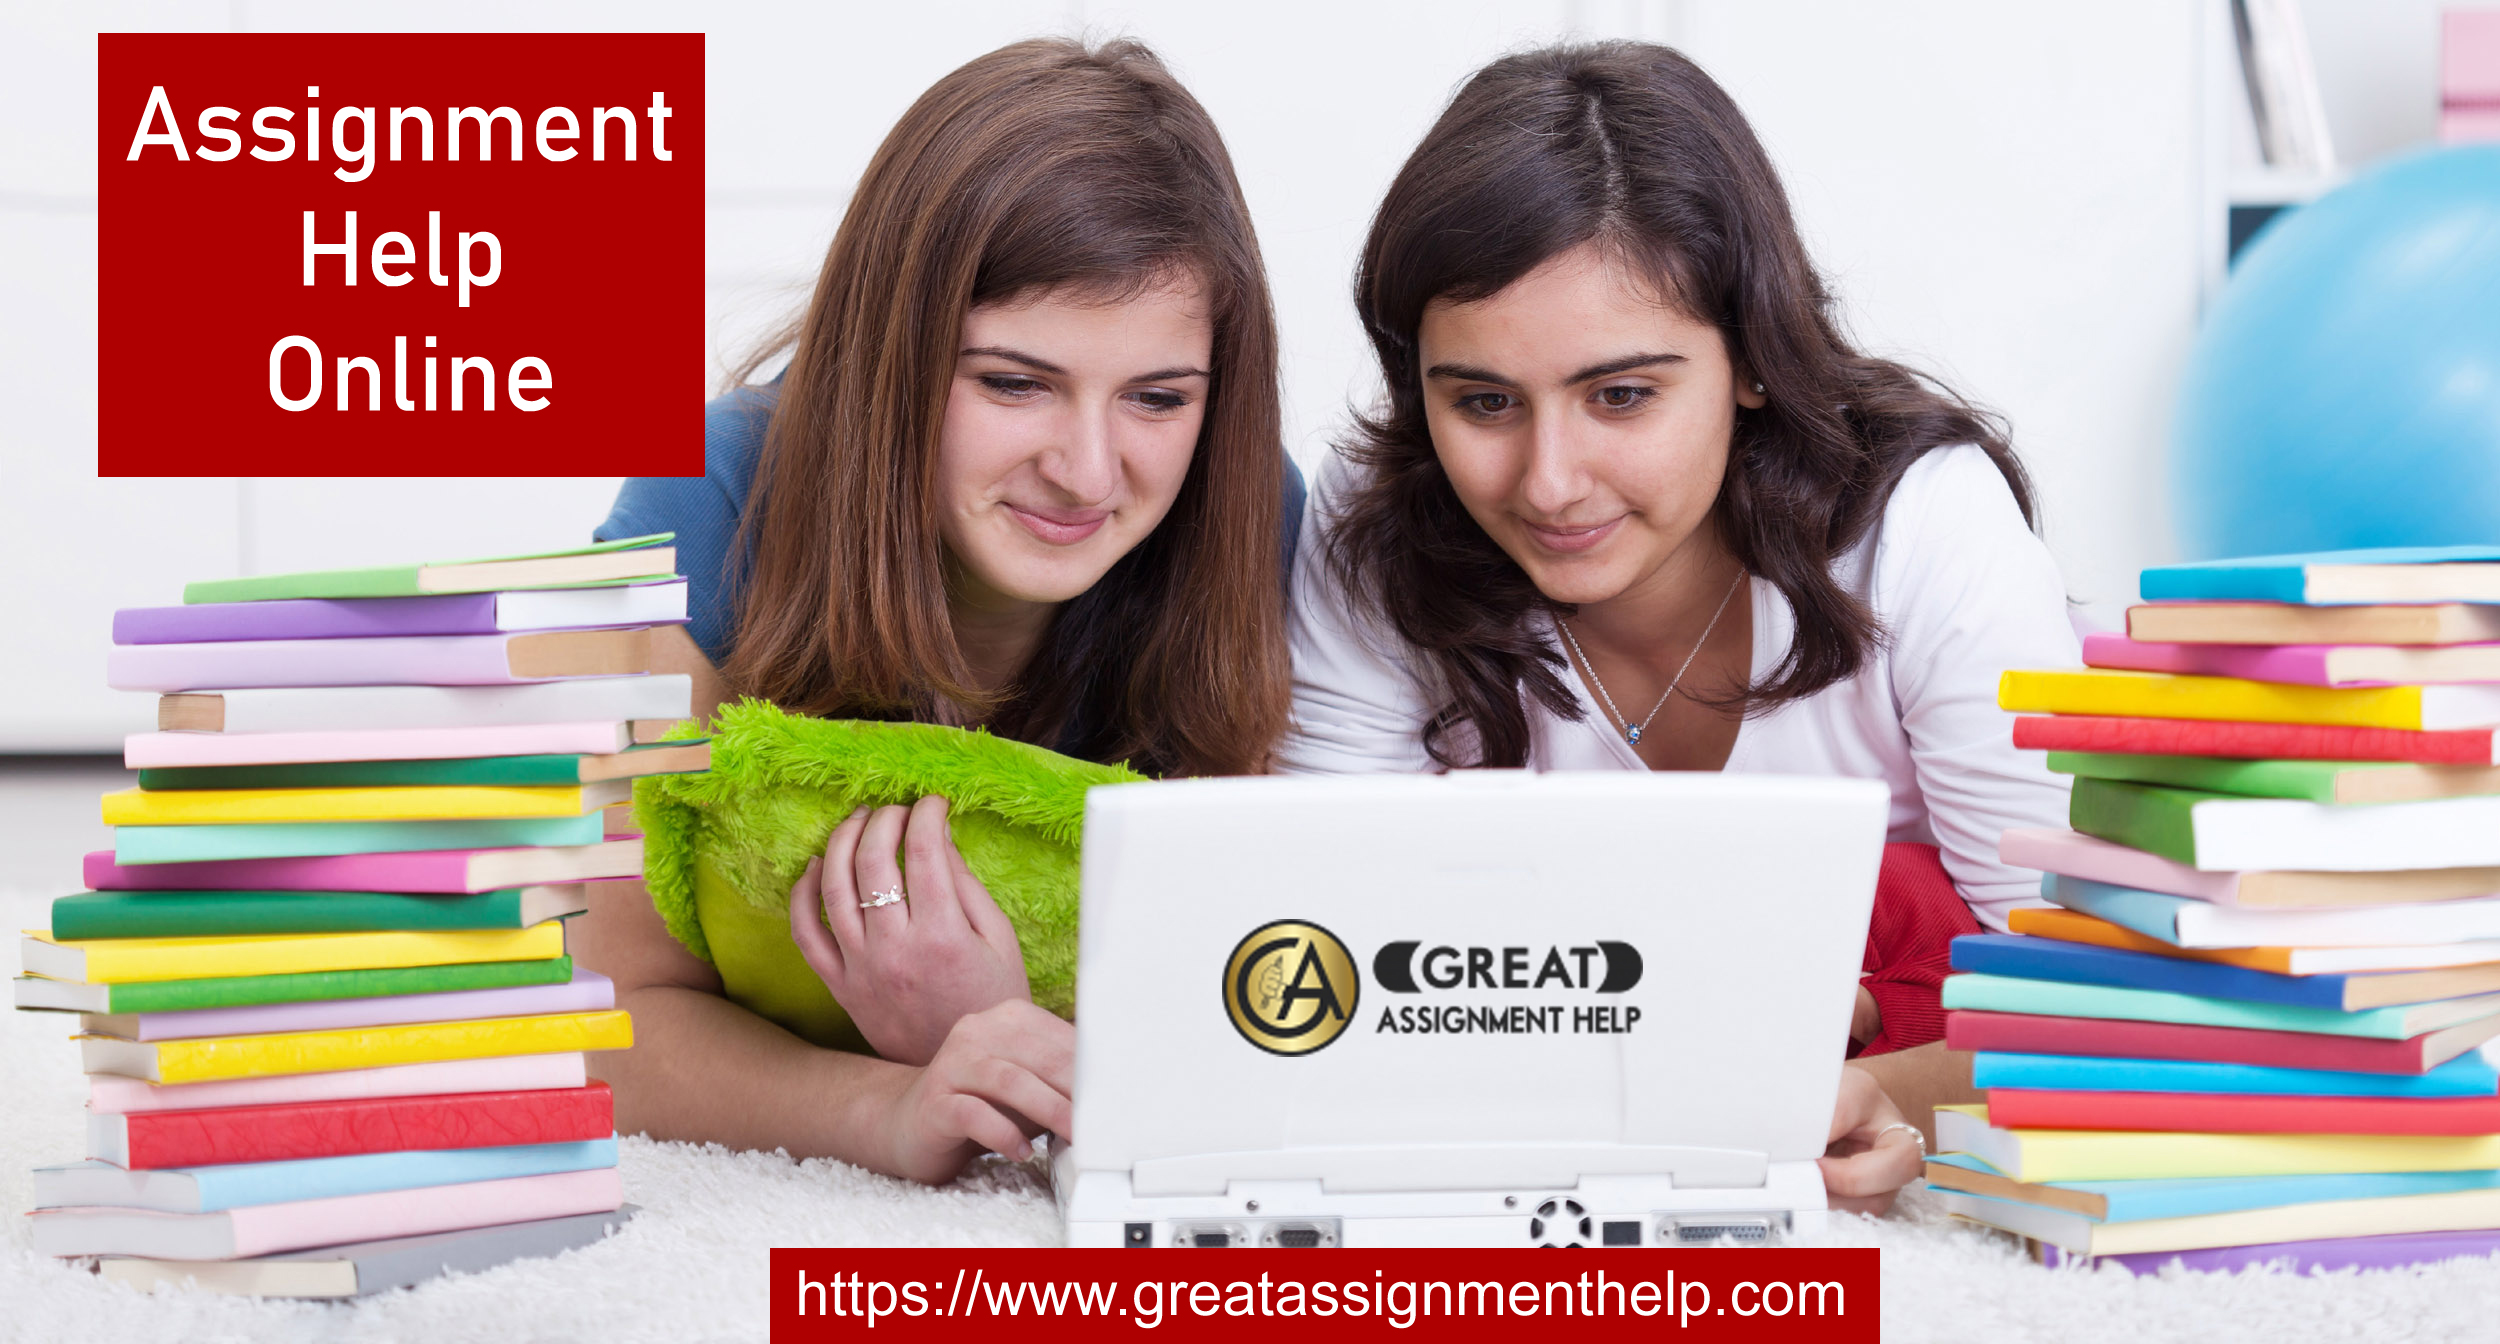 Https help service. Assignment help. Assignment on site.